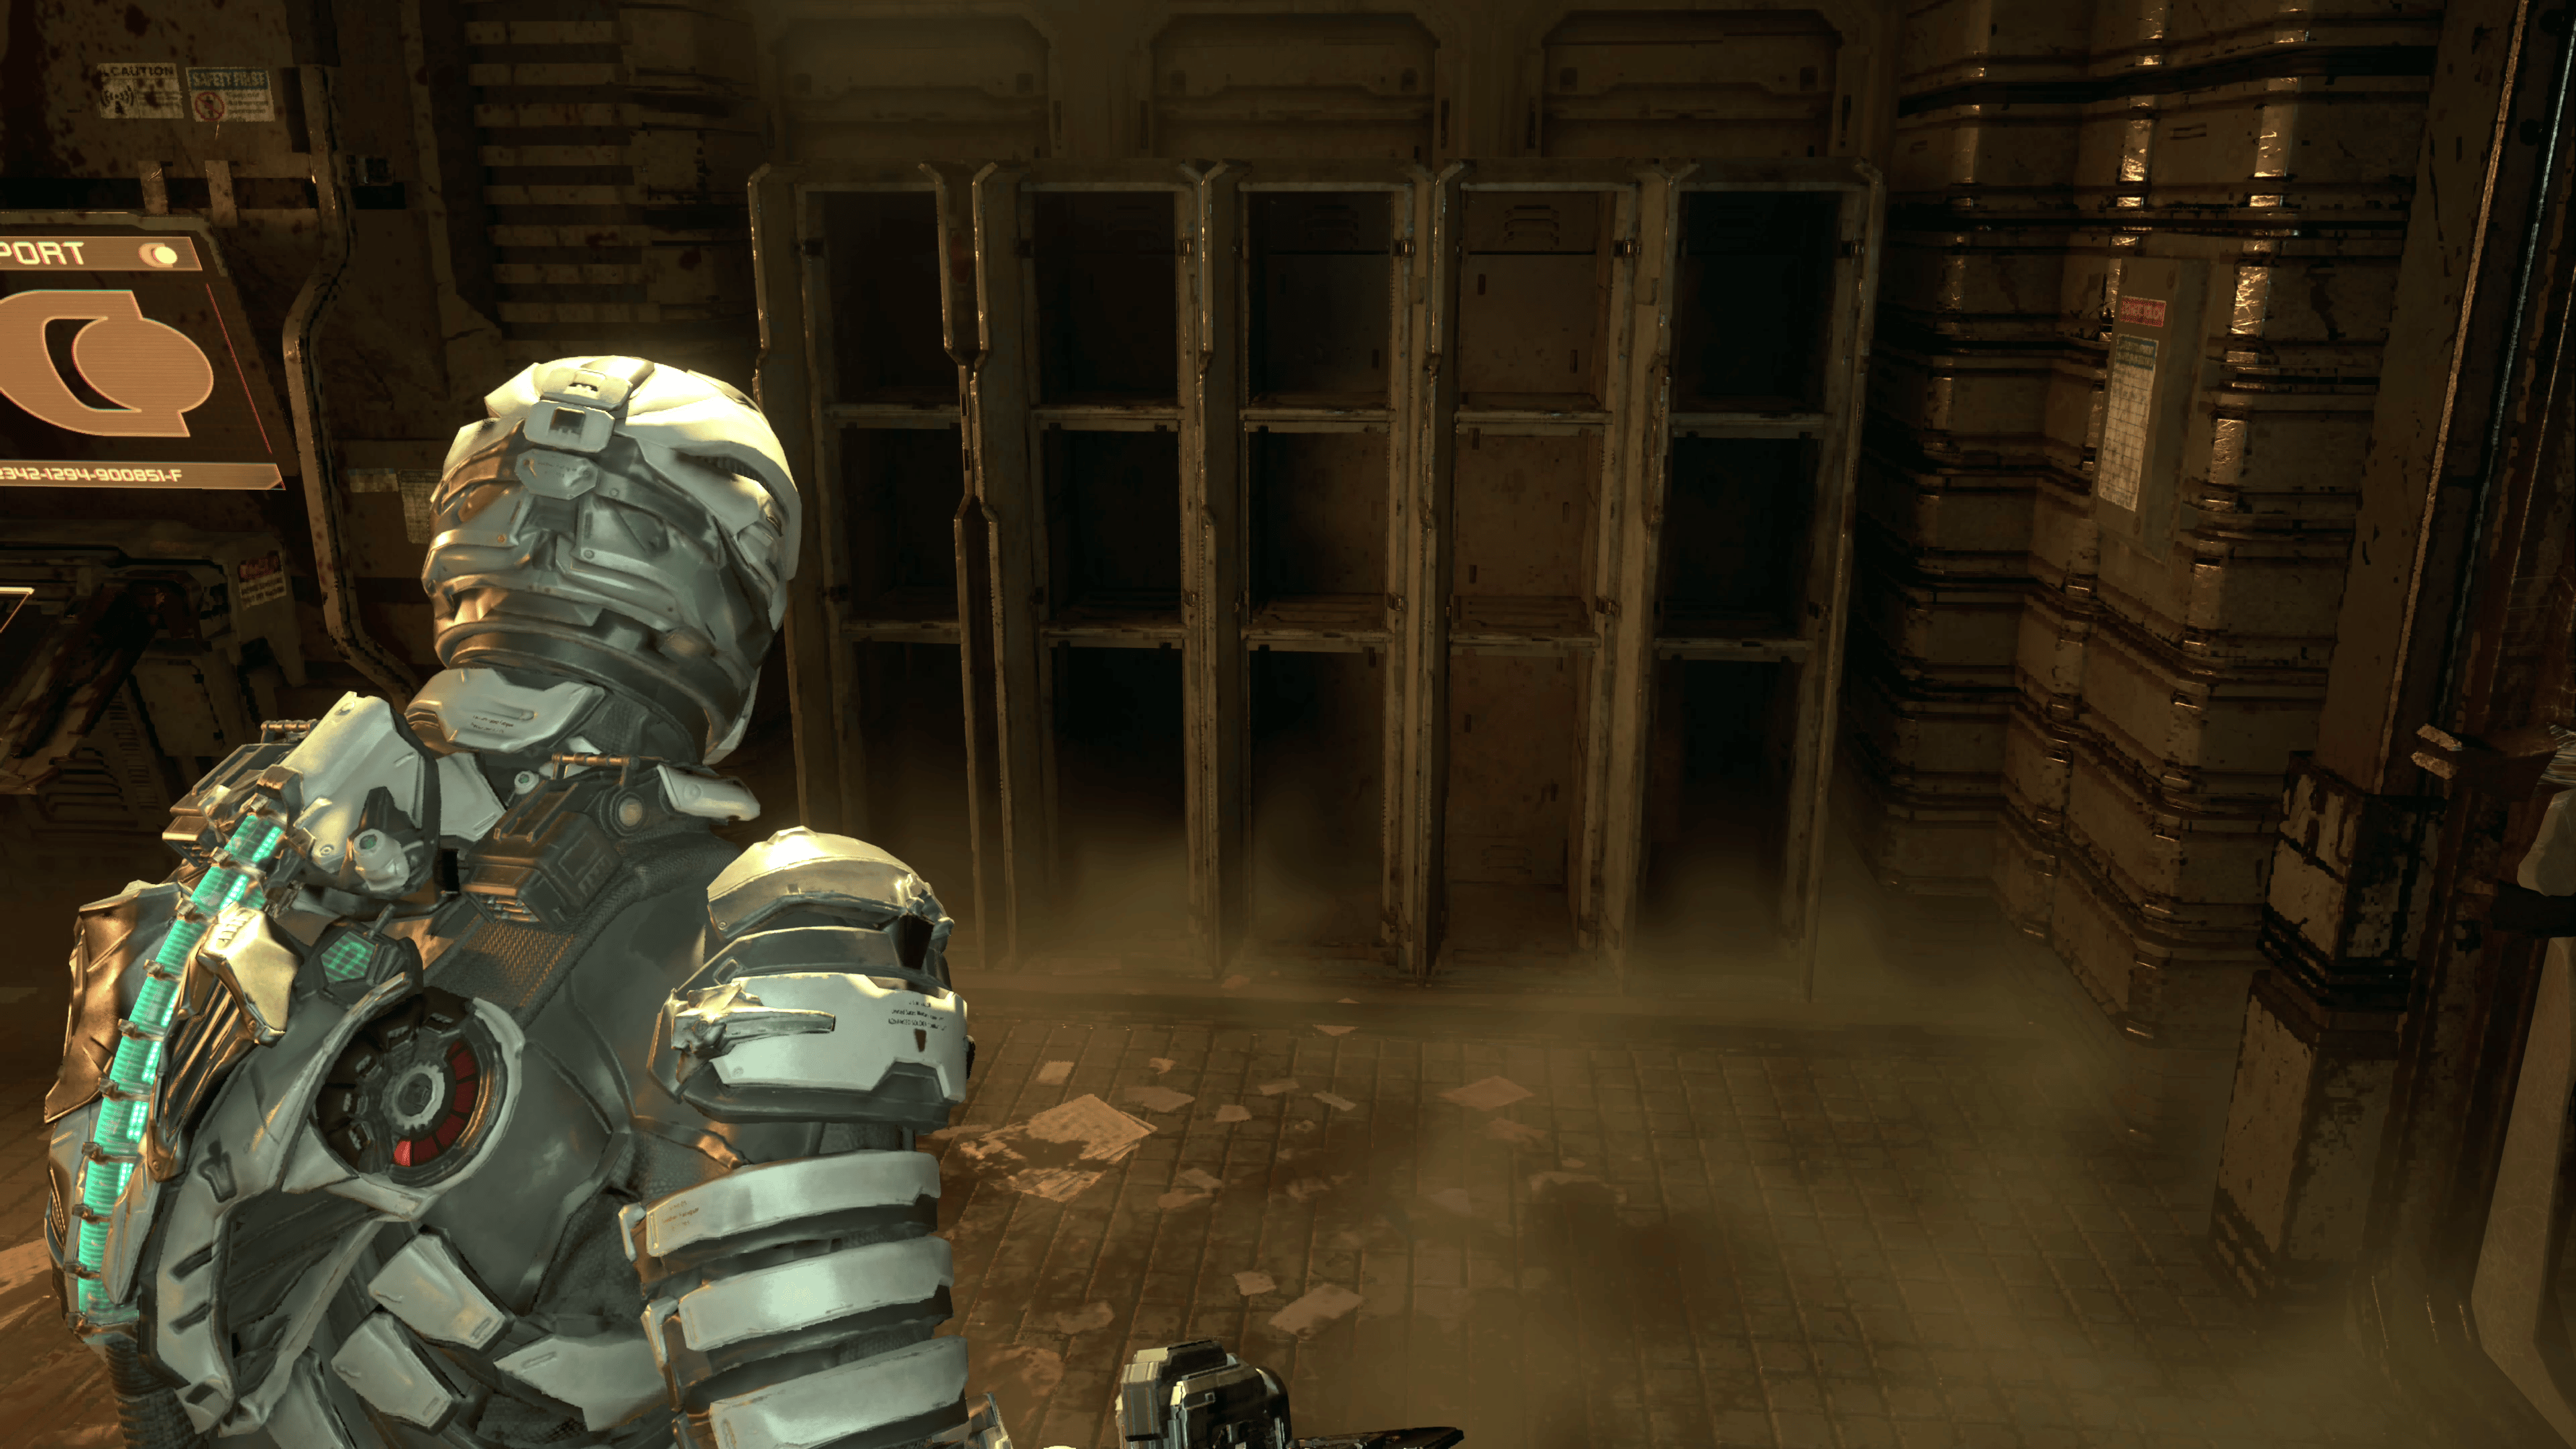 Dead Space Update 1.03 Live On PS5, Graphical Issues Fixed - PlayStation  Universe